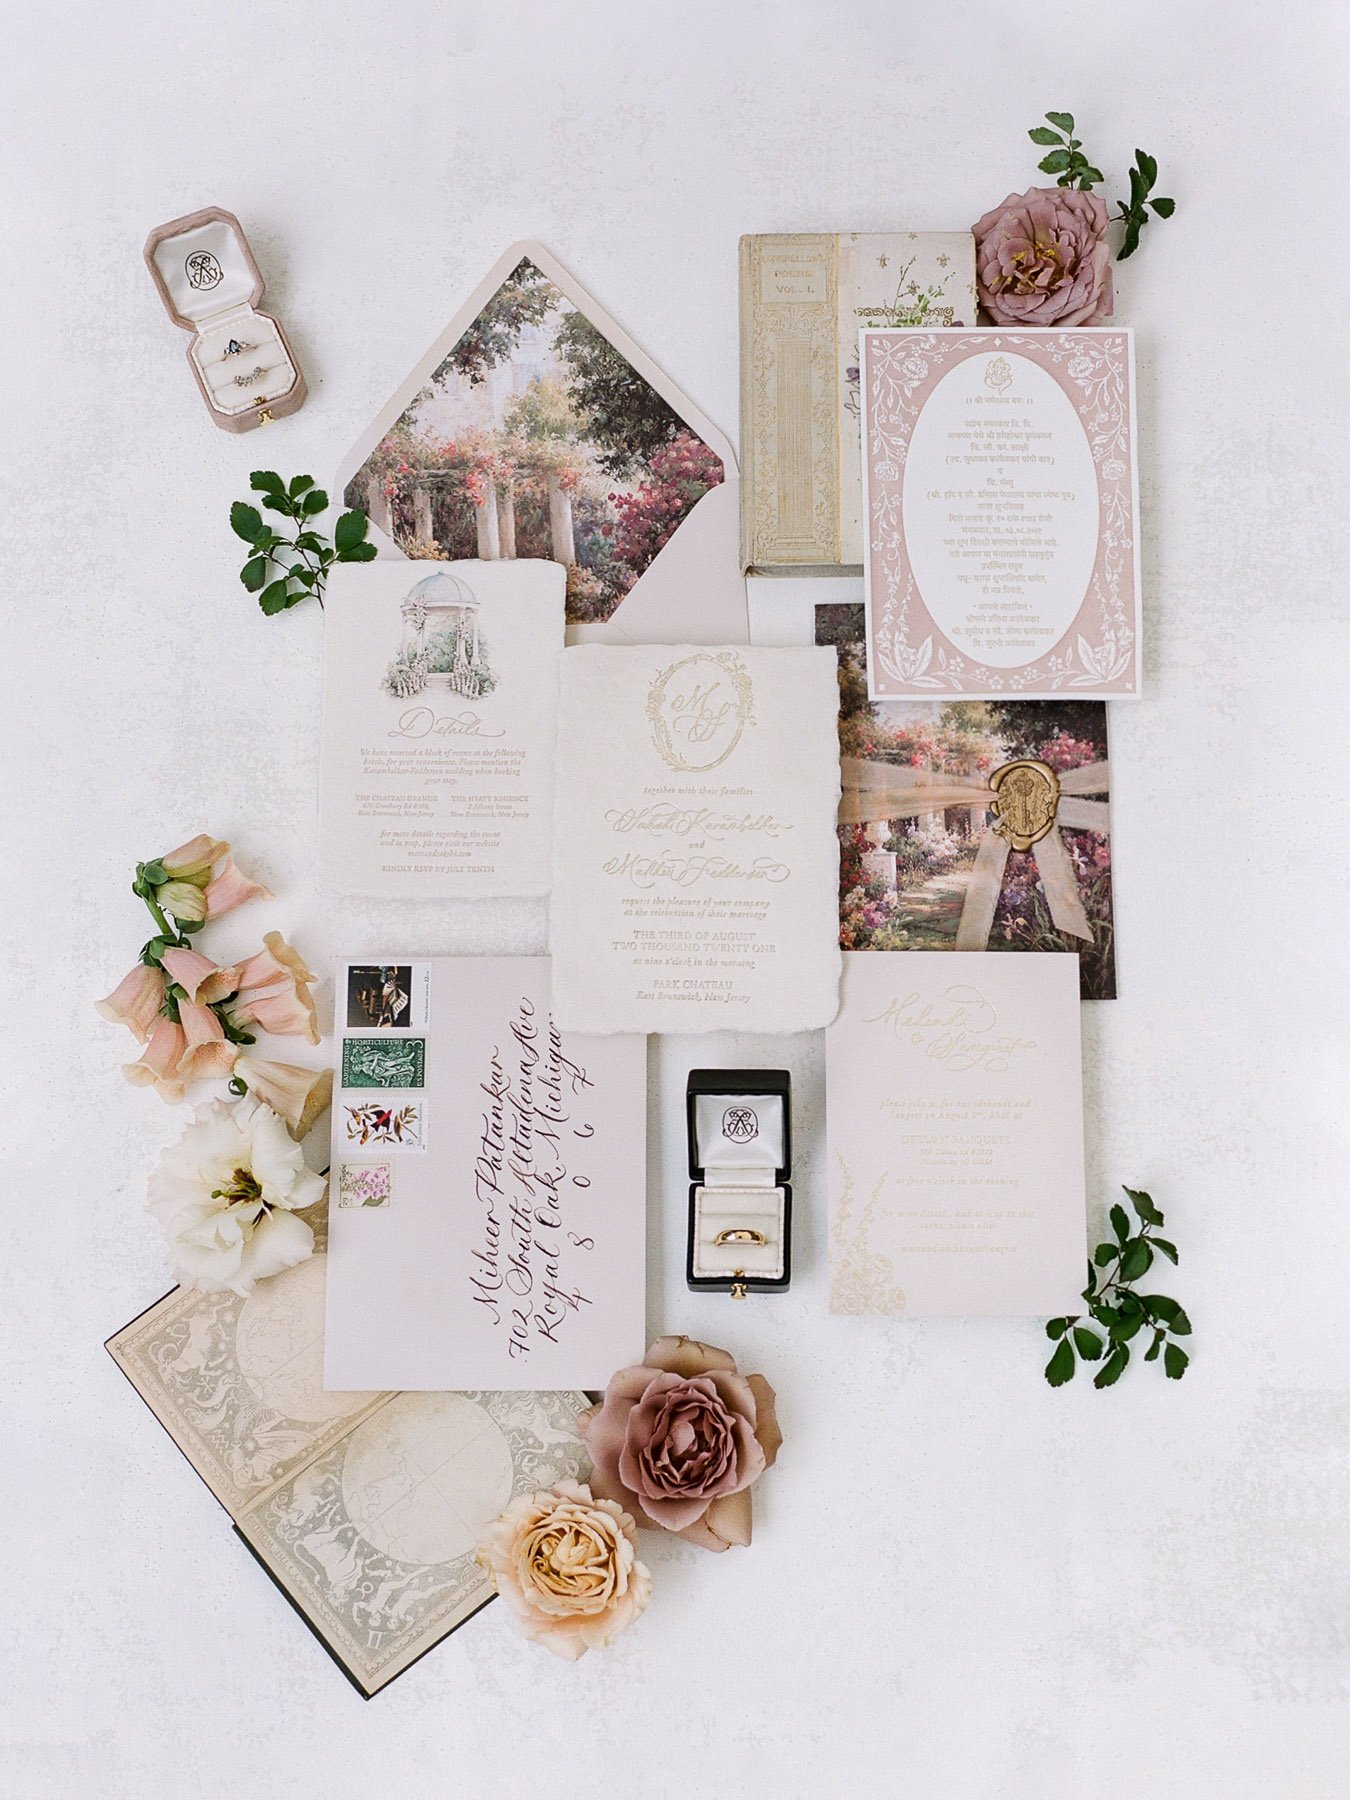 Park Chateau wedding featuring Blue Pansy Floral Design, Amorette Events and Inquisited Invitations featured in Martha Stewart Weddings